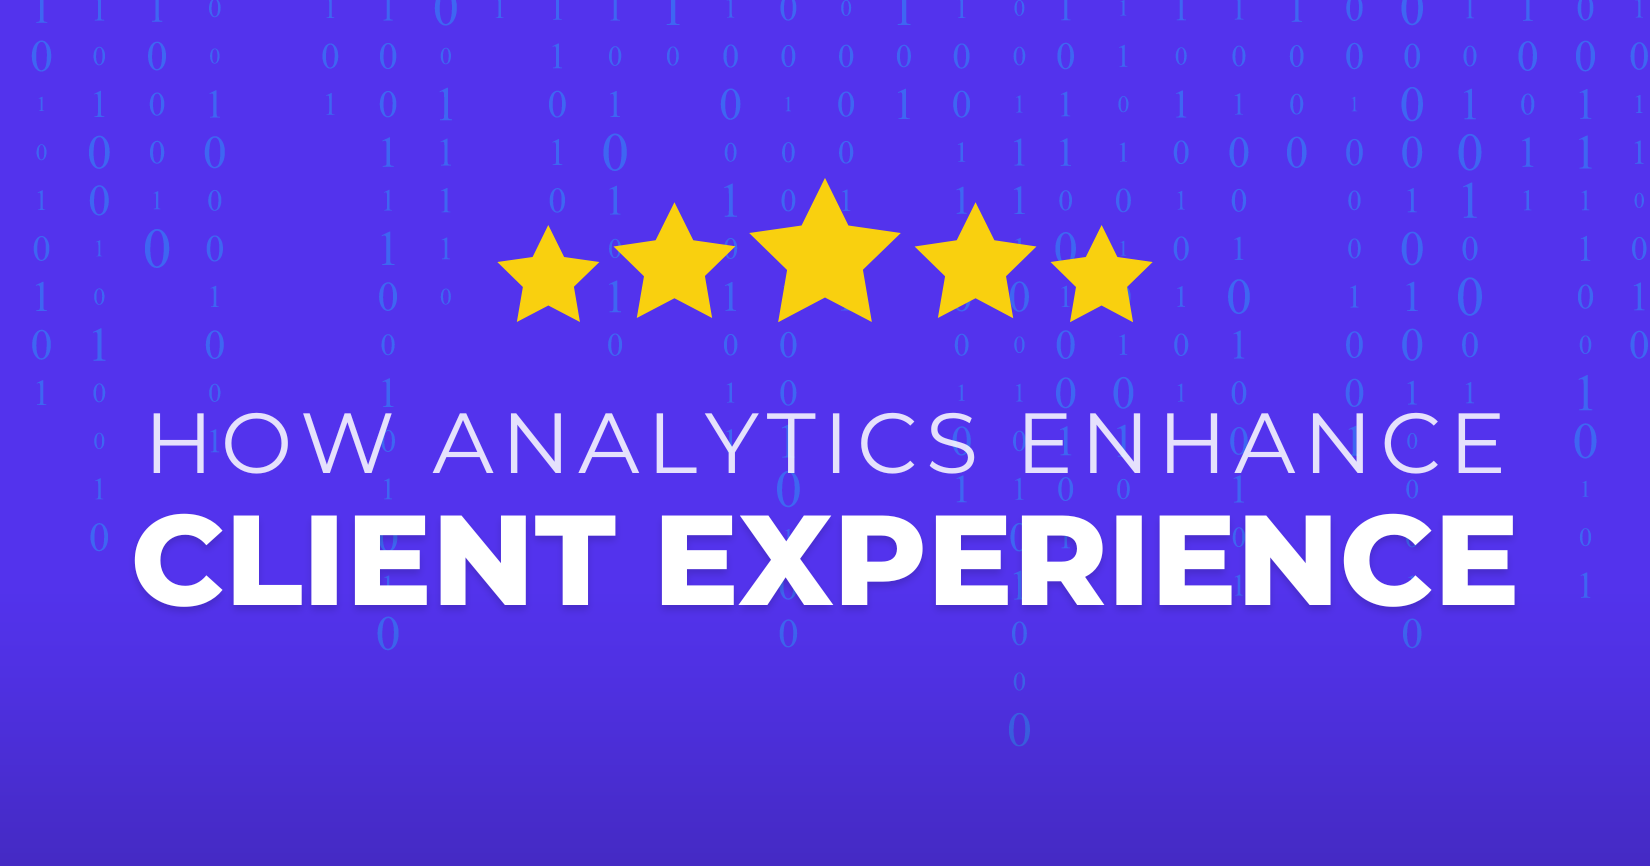 How Digital Agencies Can Use Analytics to Enhance Client Experience